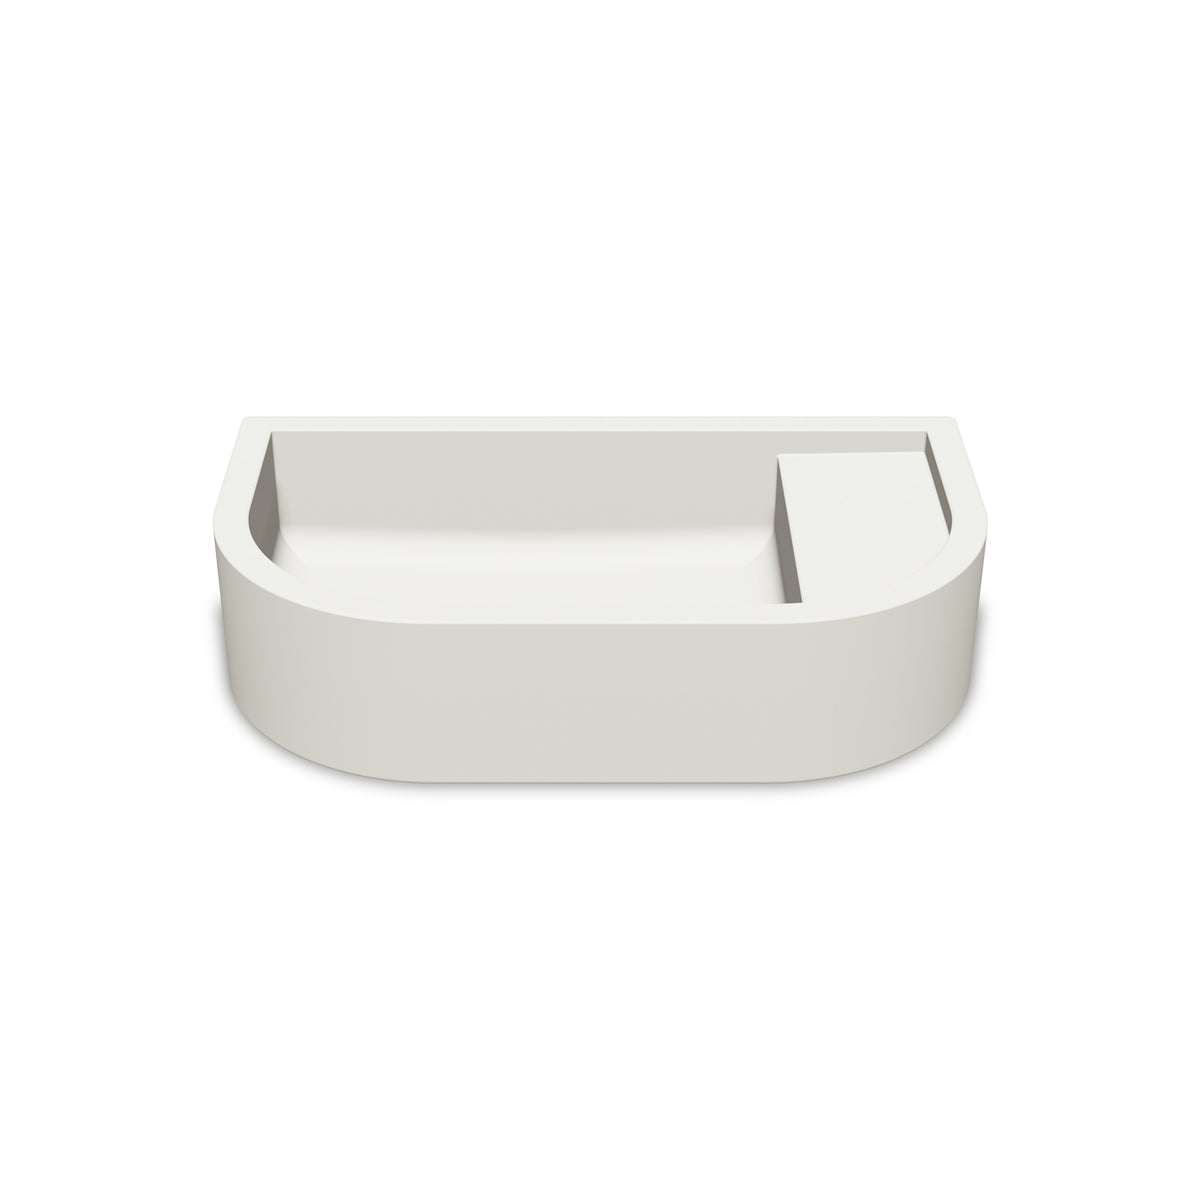 Loop 02 Basin - Surface Mount (Ivory,No Tap Hole)